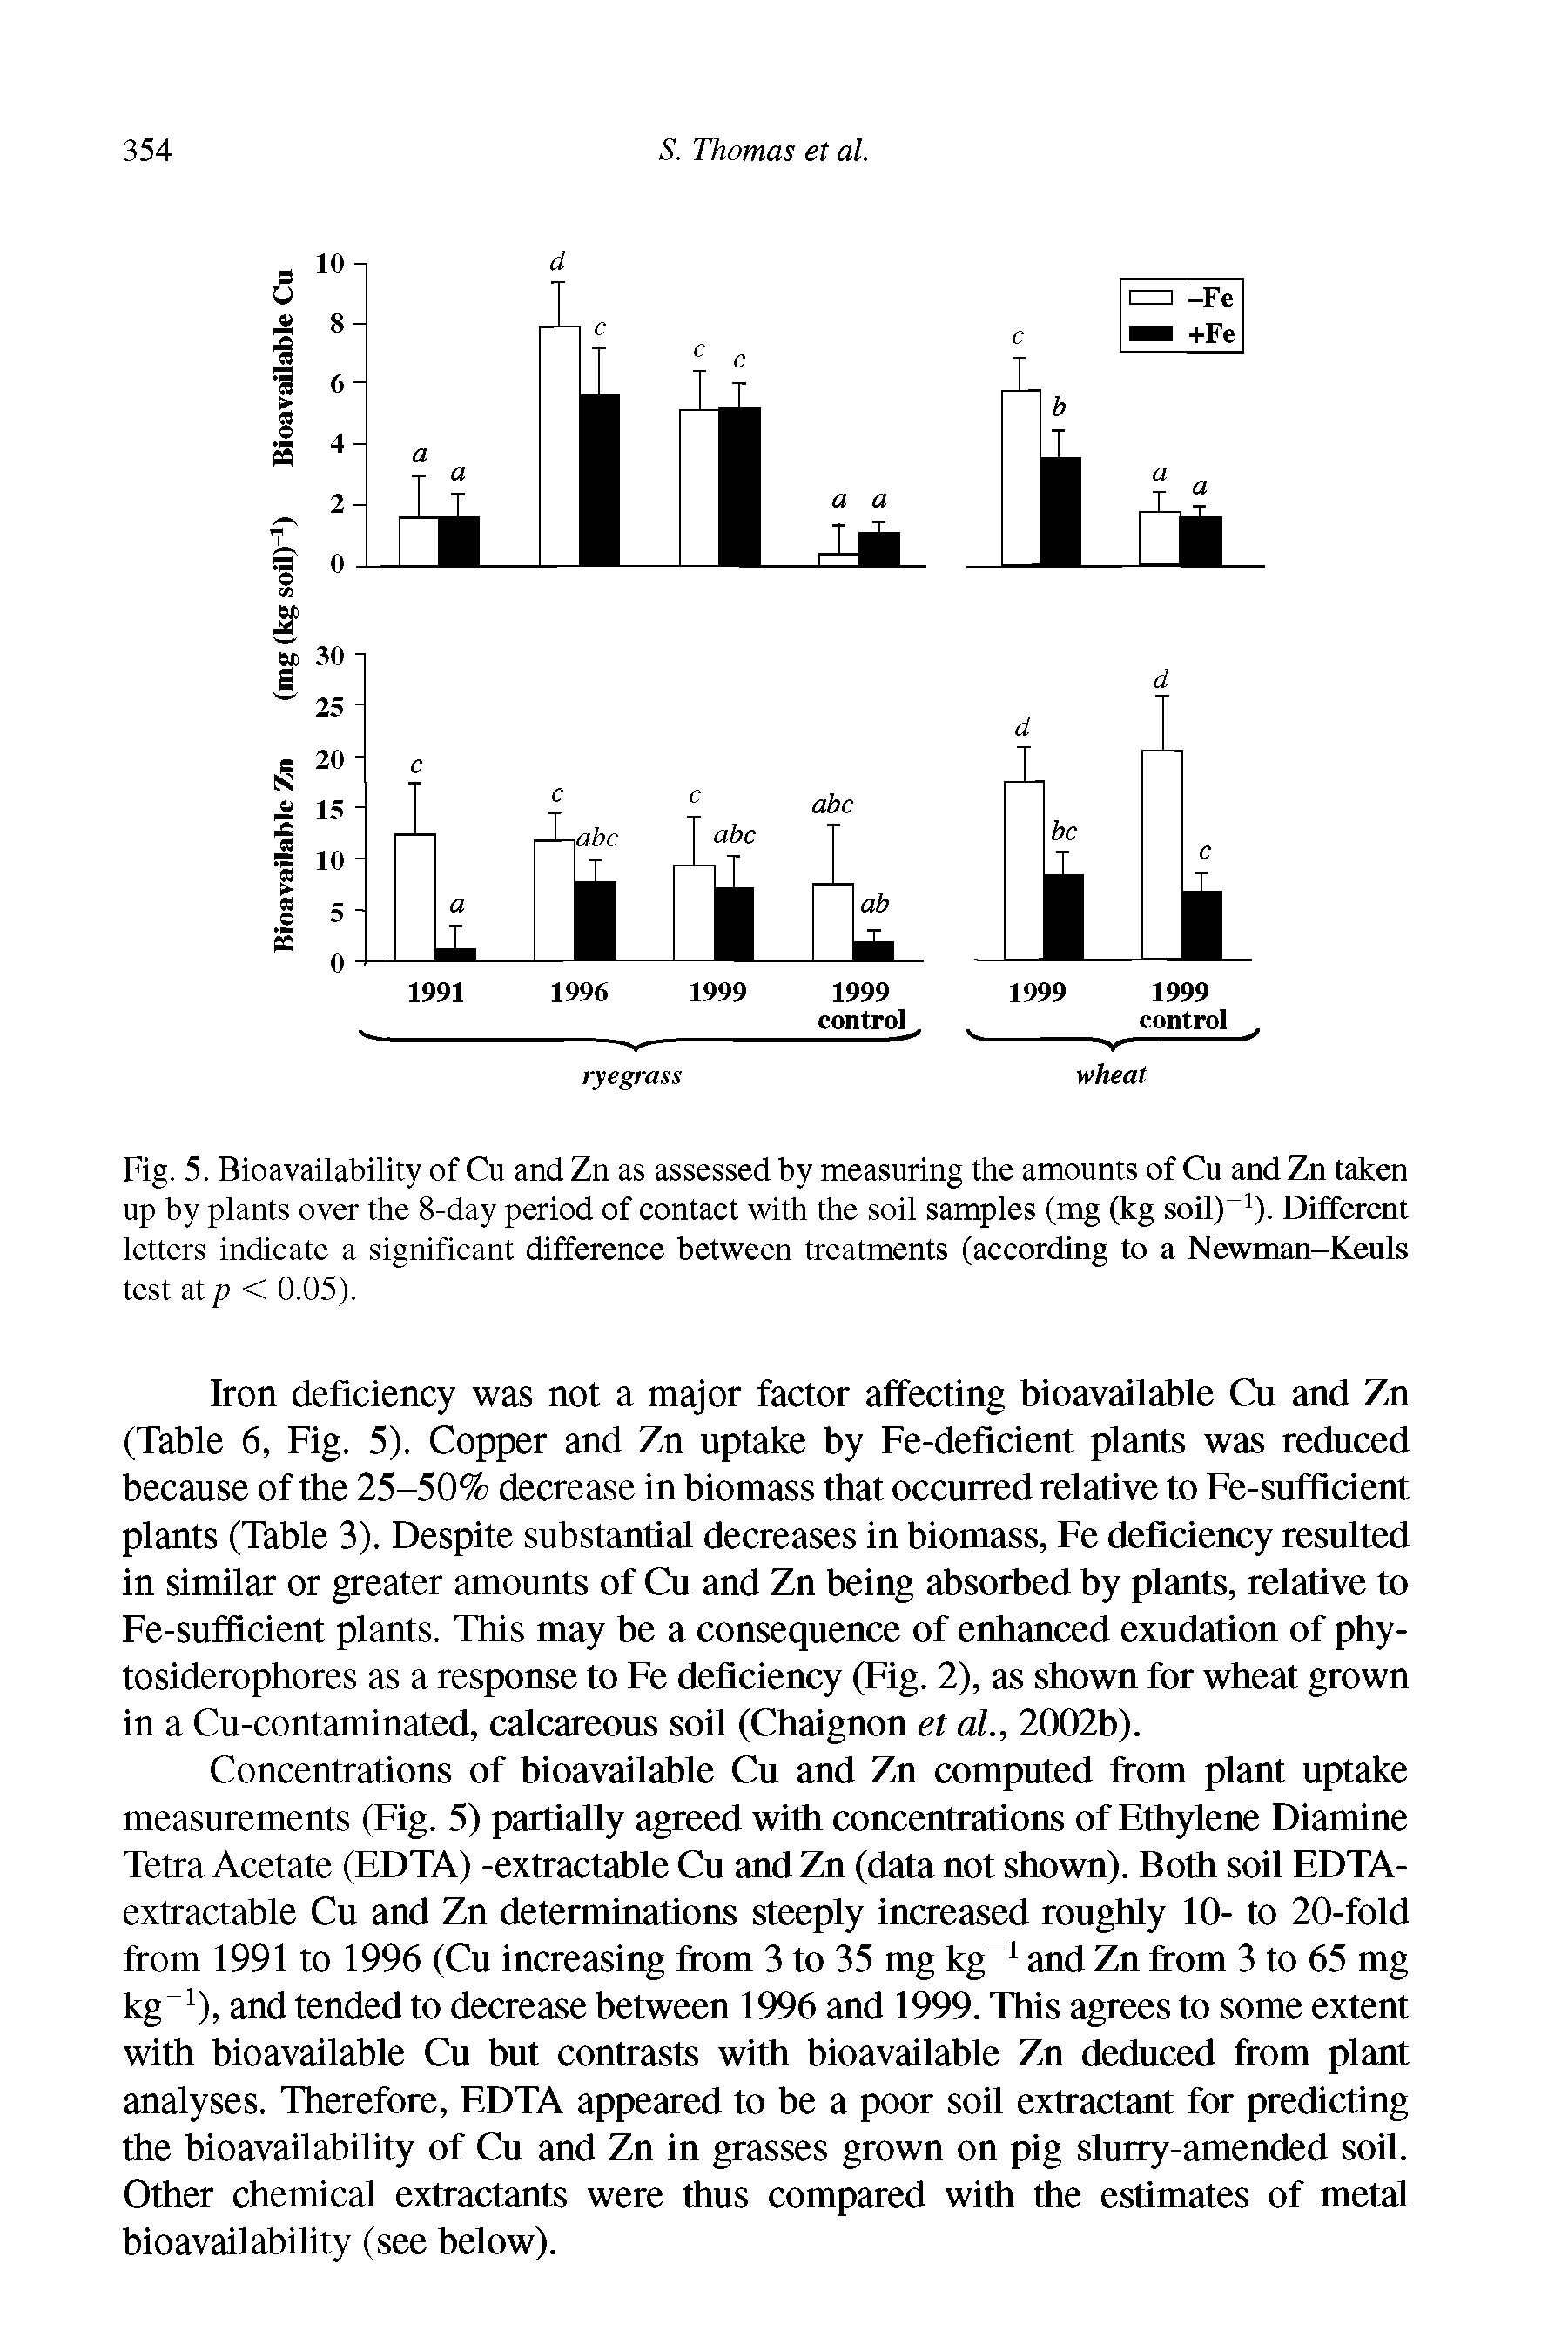 Fig. 5. Bioavailability of Cu and Zn as assessed by measuring the amounts of Cu and Zn taken up by plants over the 8-day period of contact with the soil samples (mg (kg soil) ). Different letters indicate a significant difference between treatments (according to a Newman-Keuls test atp < 0.05).